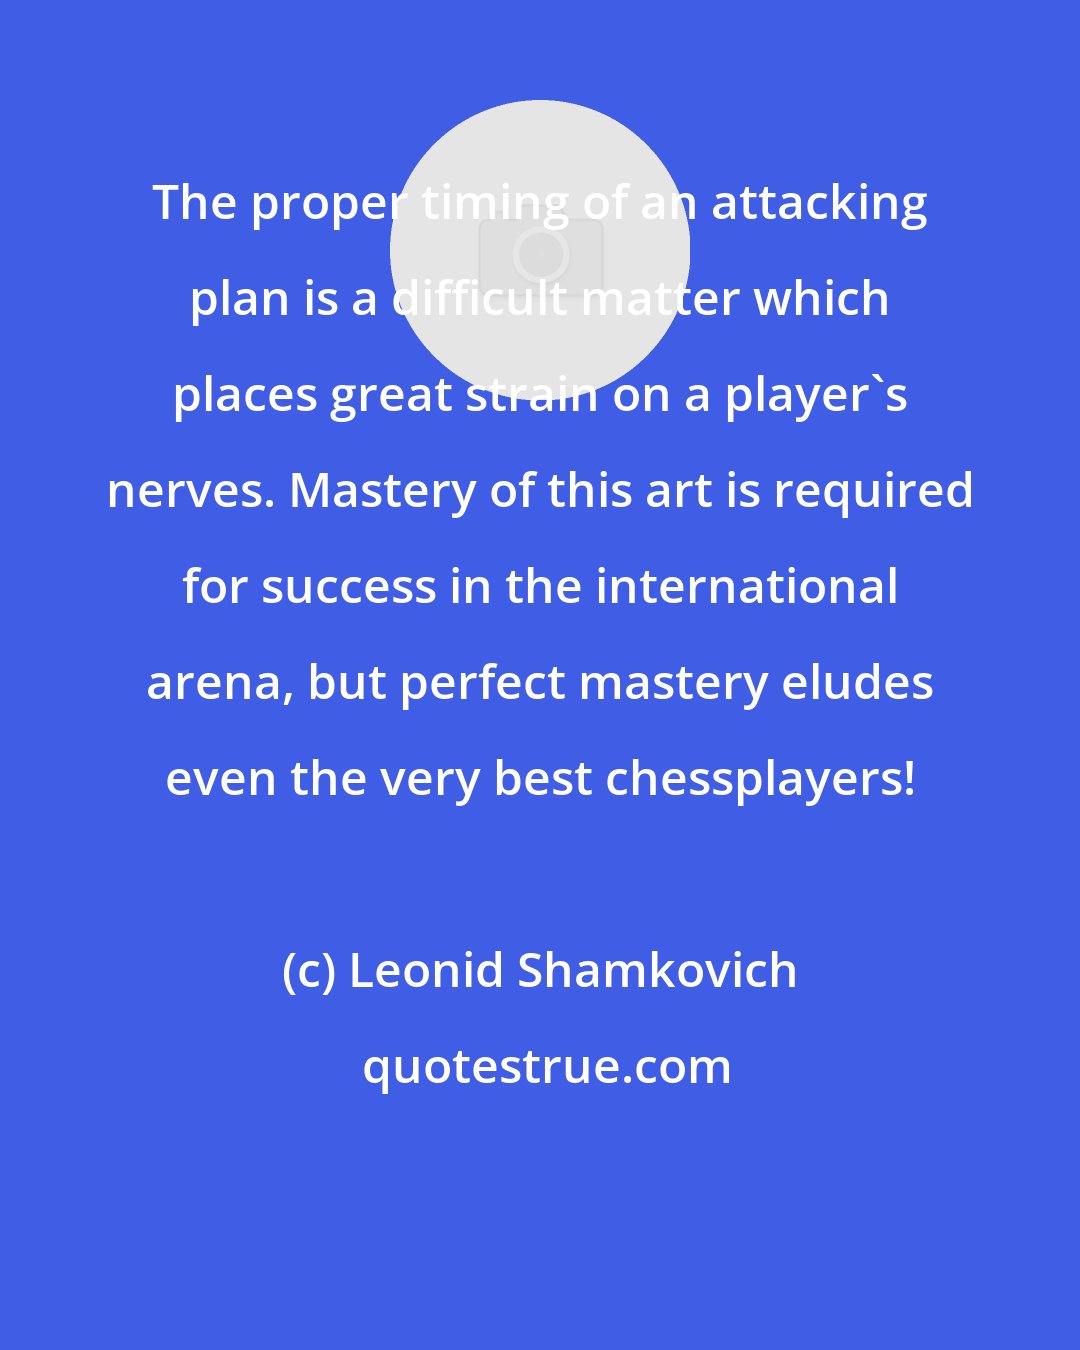 Leonid Shamkovich: The proper timing of an attacking plan is a difficult matter which places great strain on a player's nerves. Mastery of this art is required for success in the international arena, but perfect mastery eludes even the very best chessplayers!